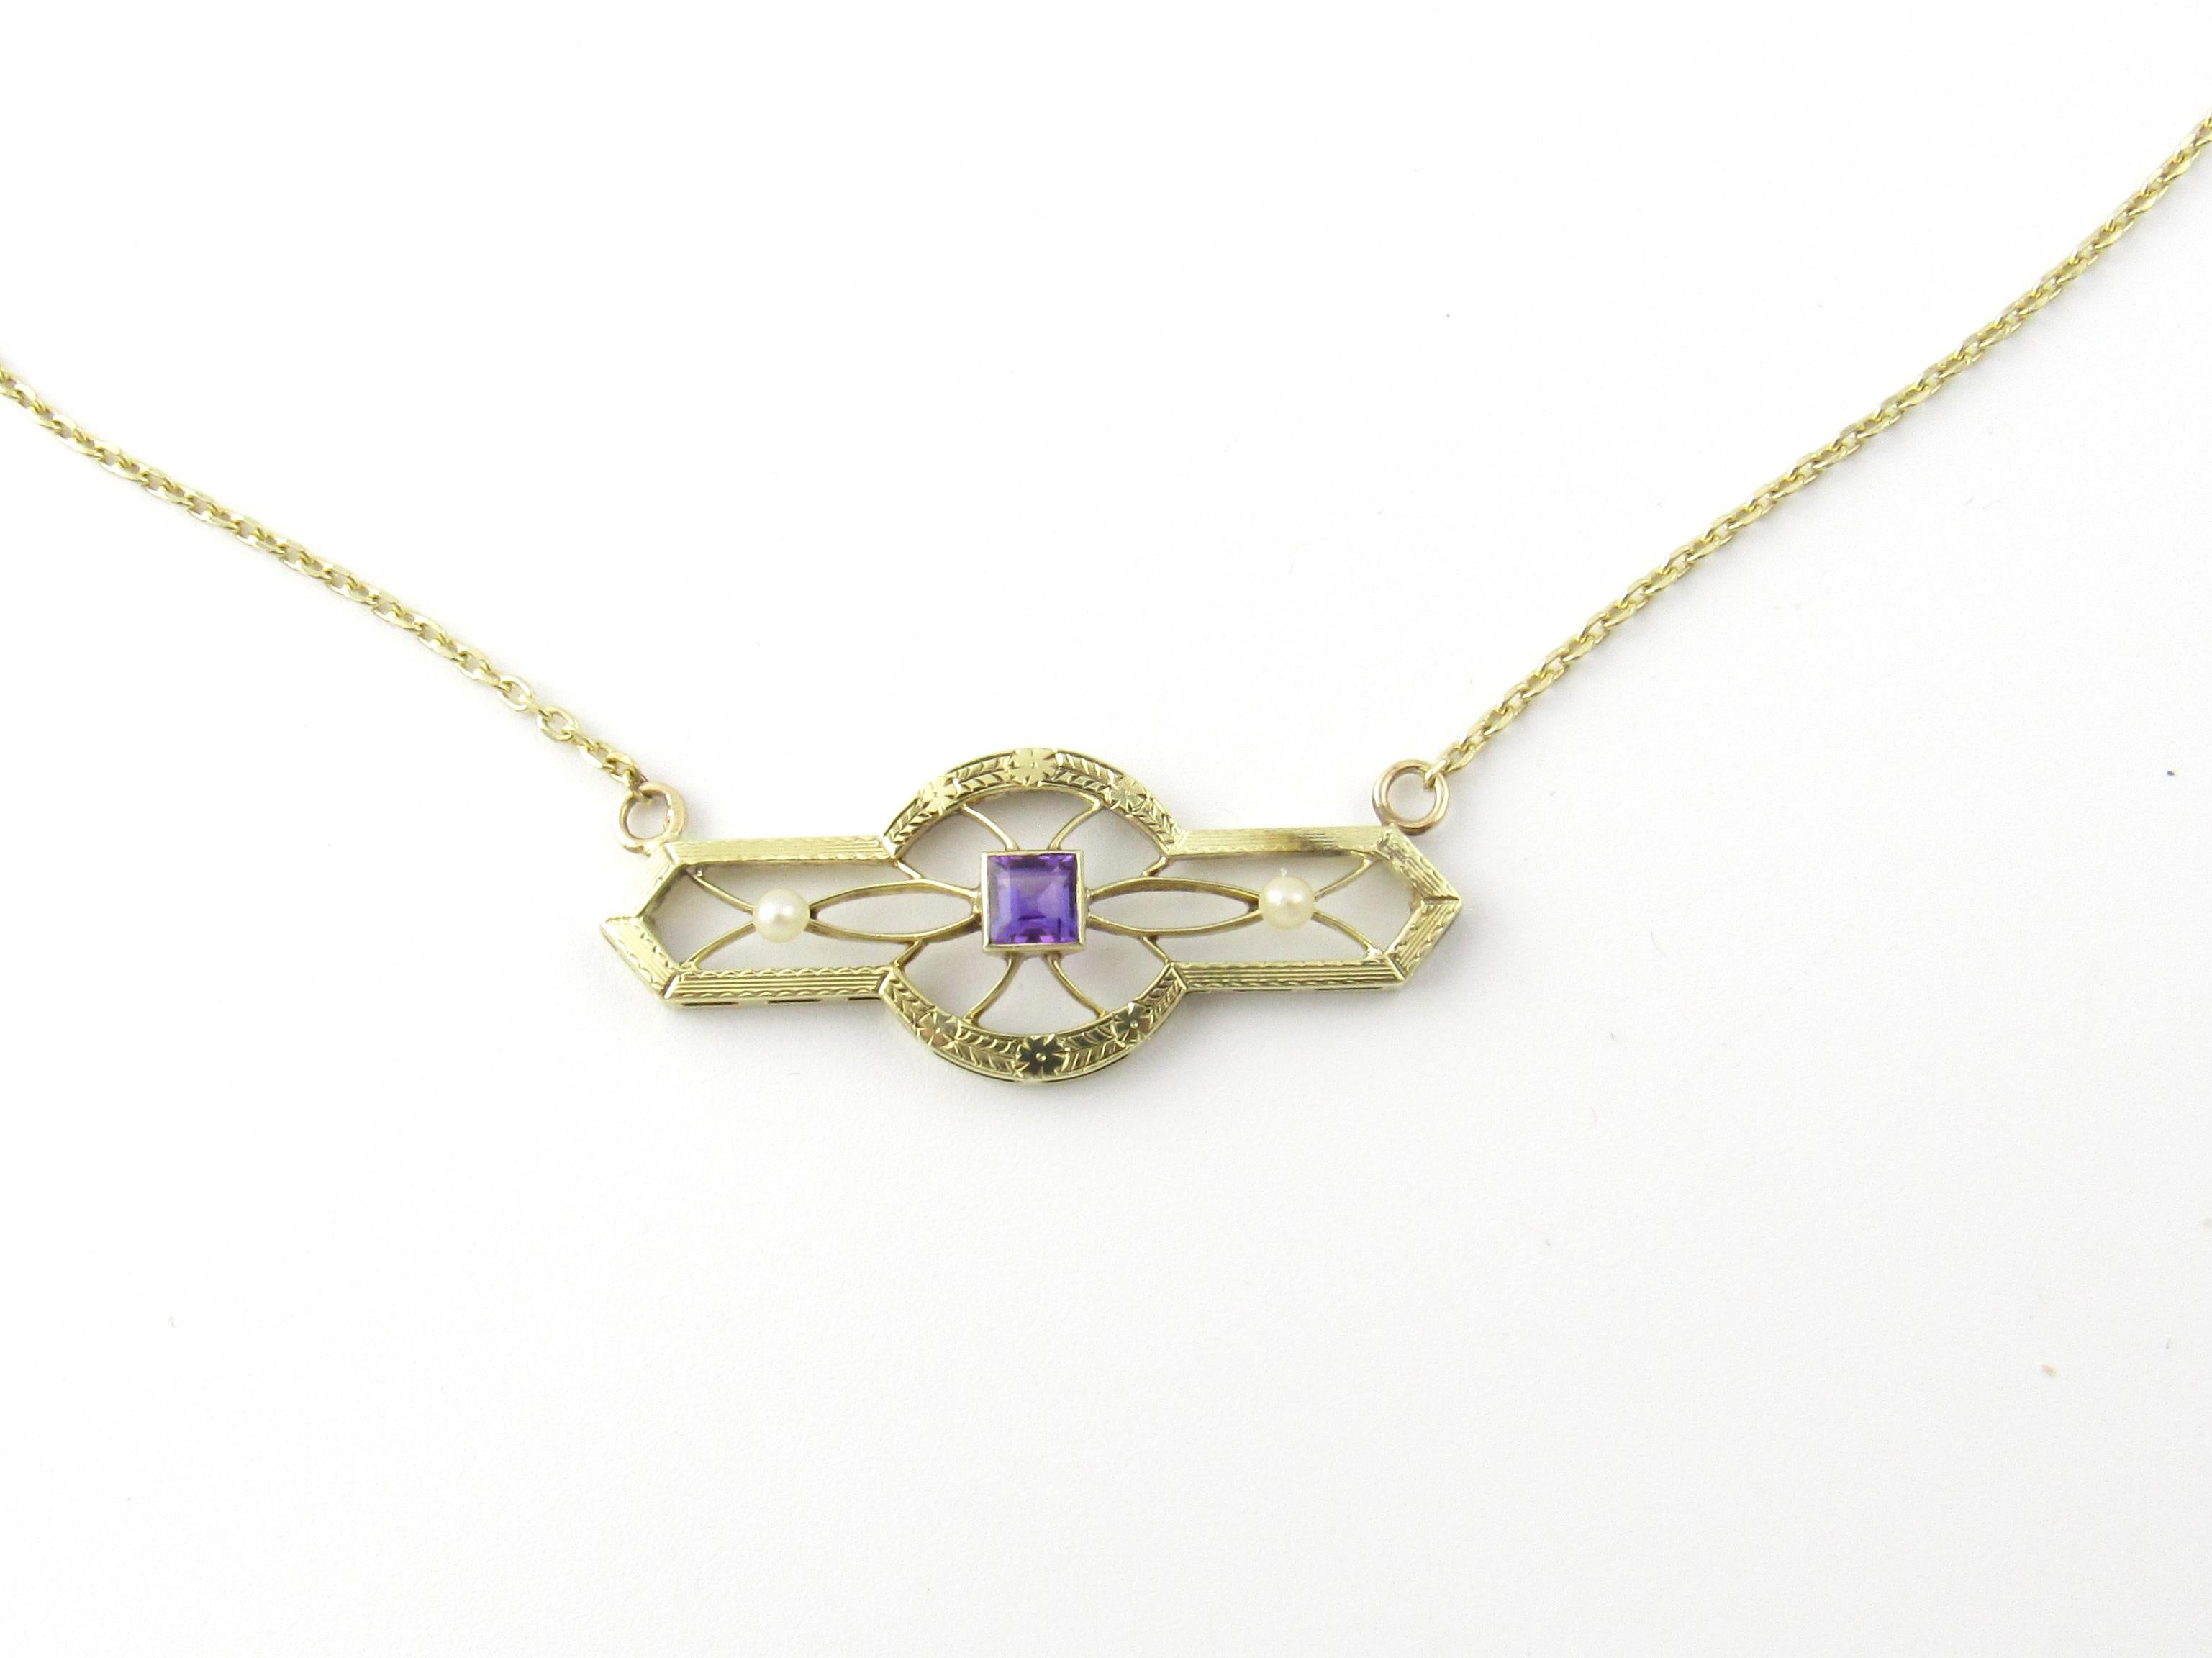 Antique 14 Karat Yellow Gold Amethyst and Pearl Pendant Necklace

This lovely necklace features a stunning antique pendant (upscaled from an antique brooch) detailed with one square amethyst (5 mm x 5 mm) and two seed pearls (2 mm each) set in